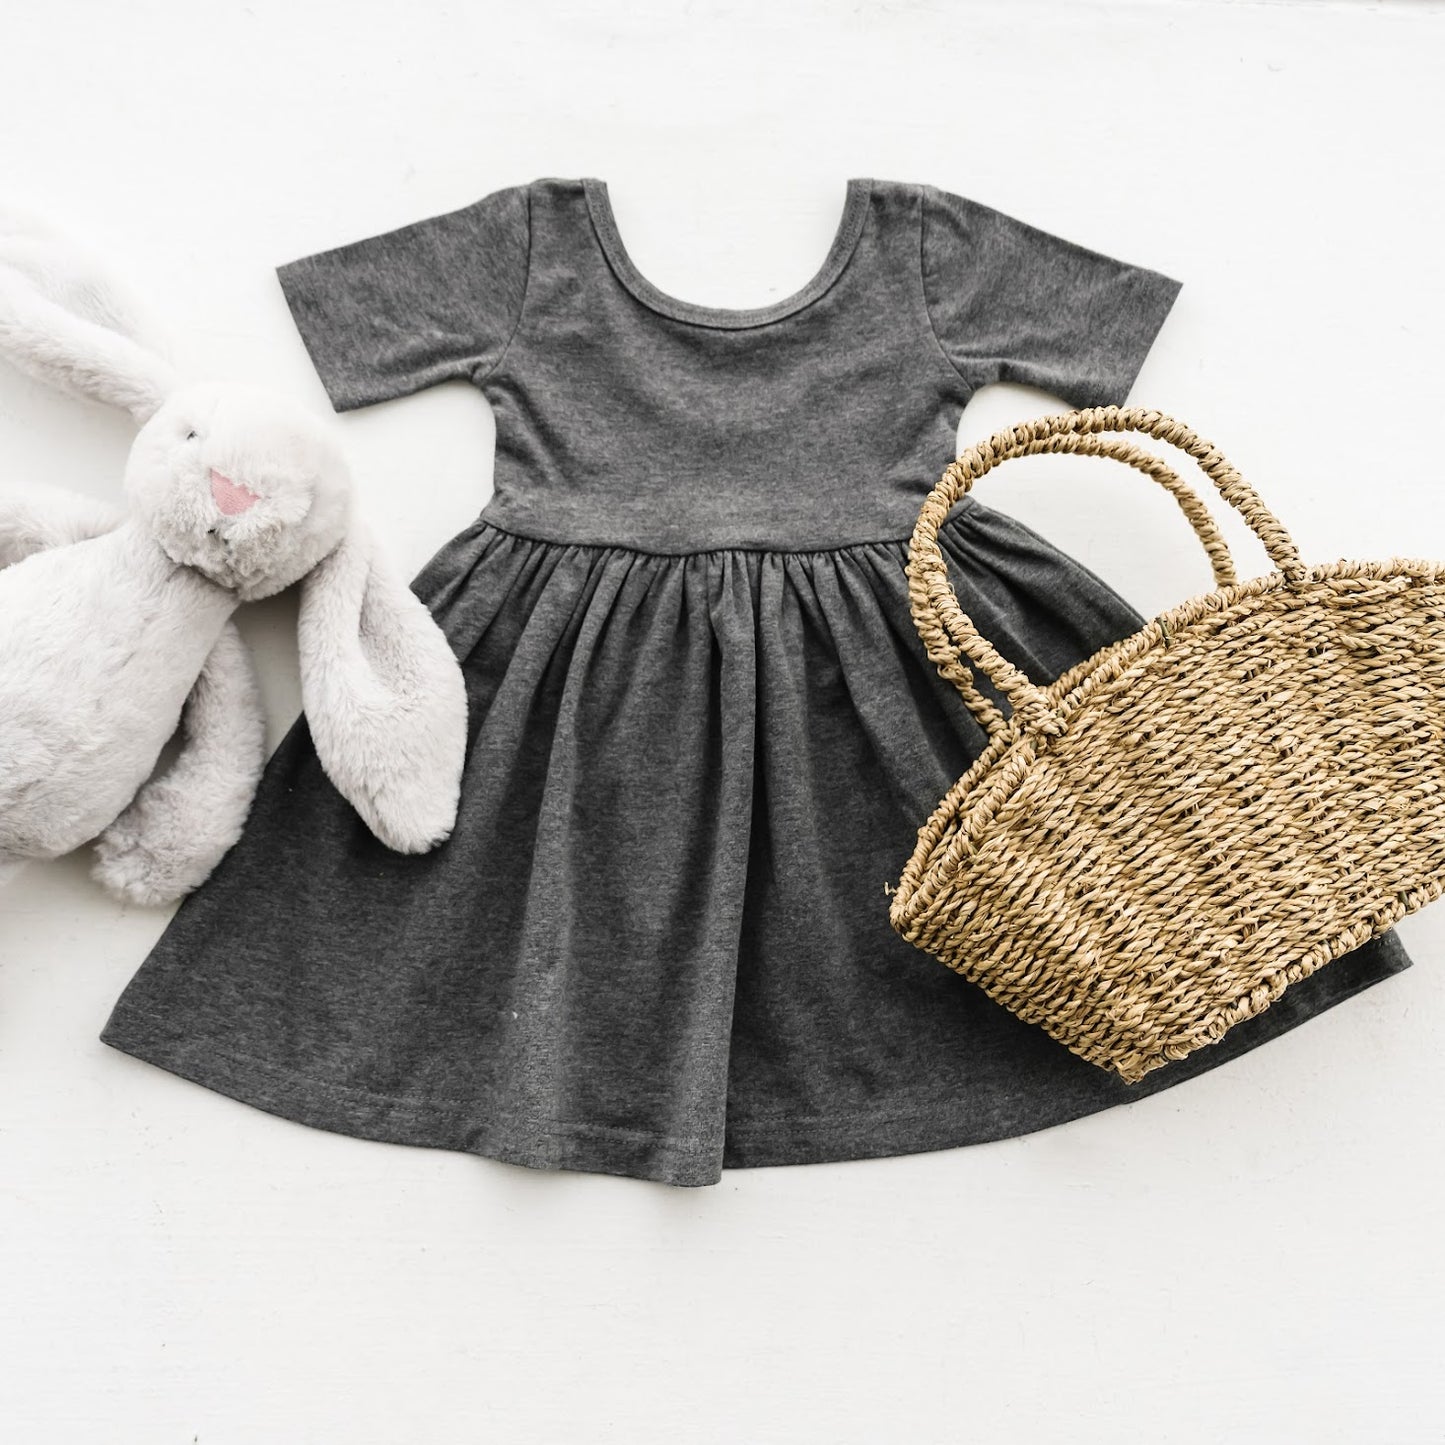 PLAY DRESS IN HEATHERED CHARCOAL